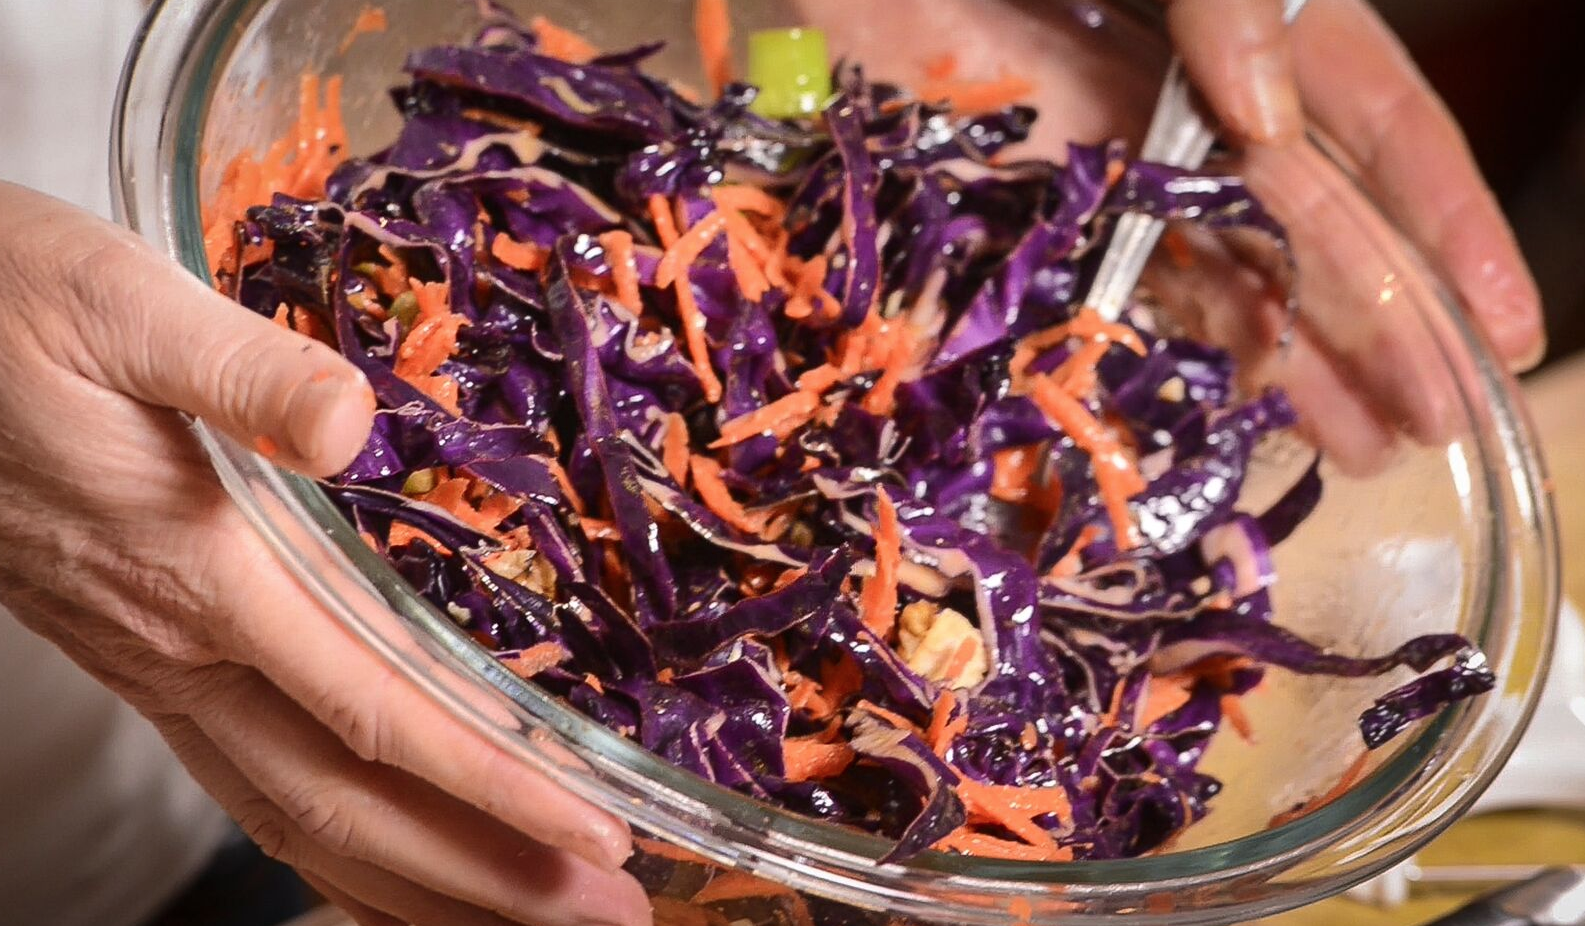 Recipe of the Week: Red Cabbage Salad